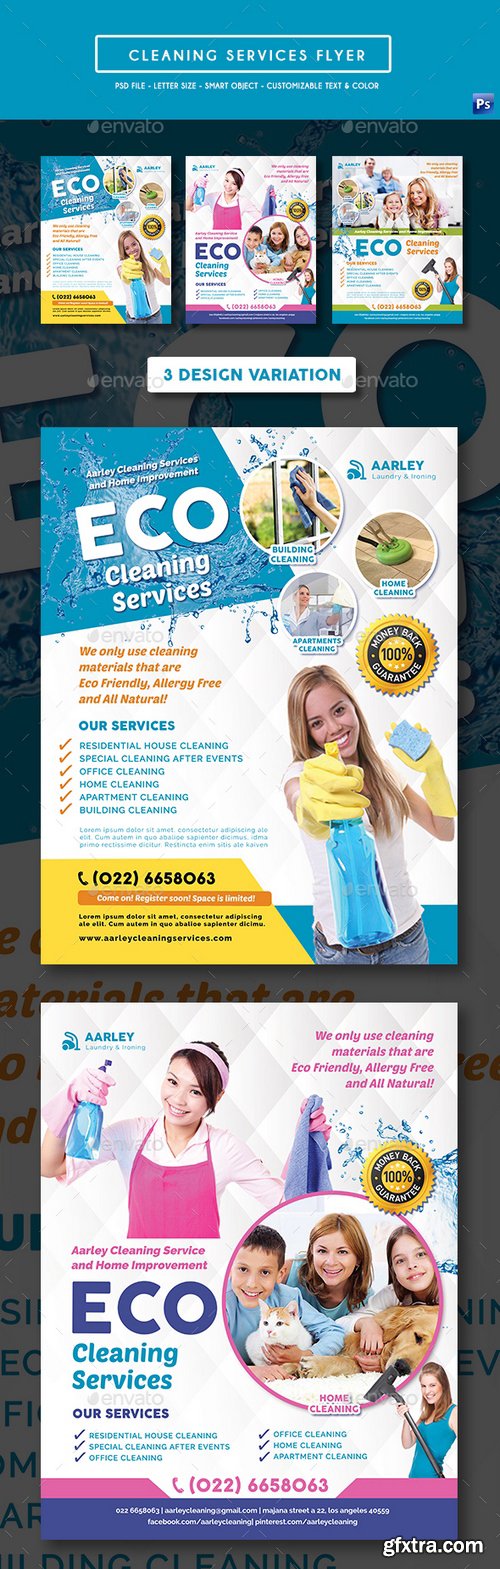 Graphicriver - Cleaning Services Flyer 19585464